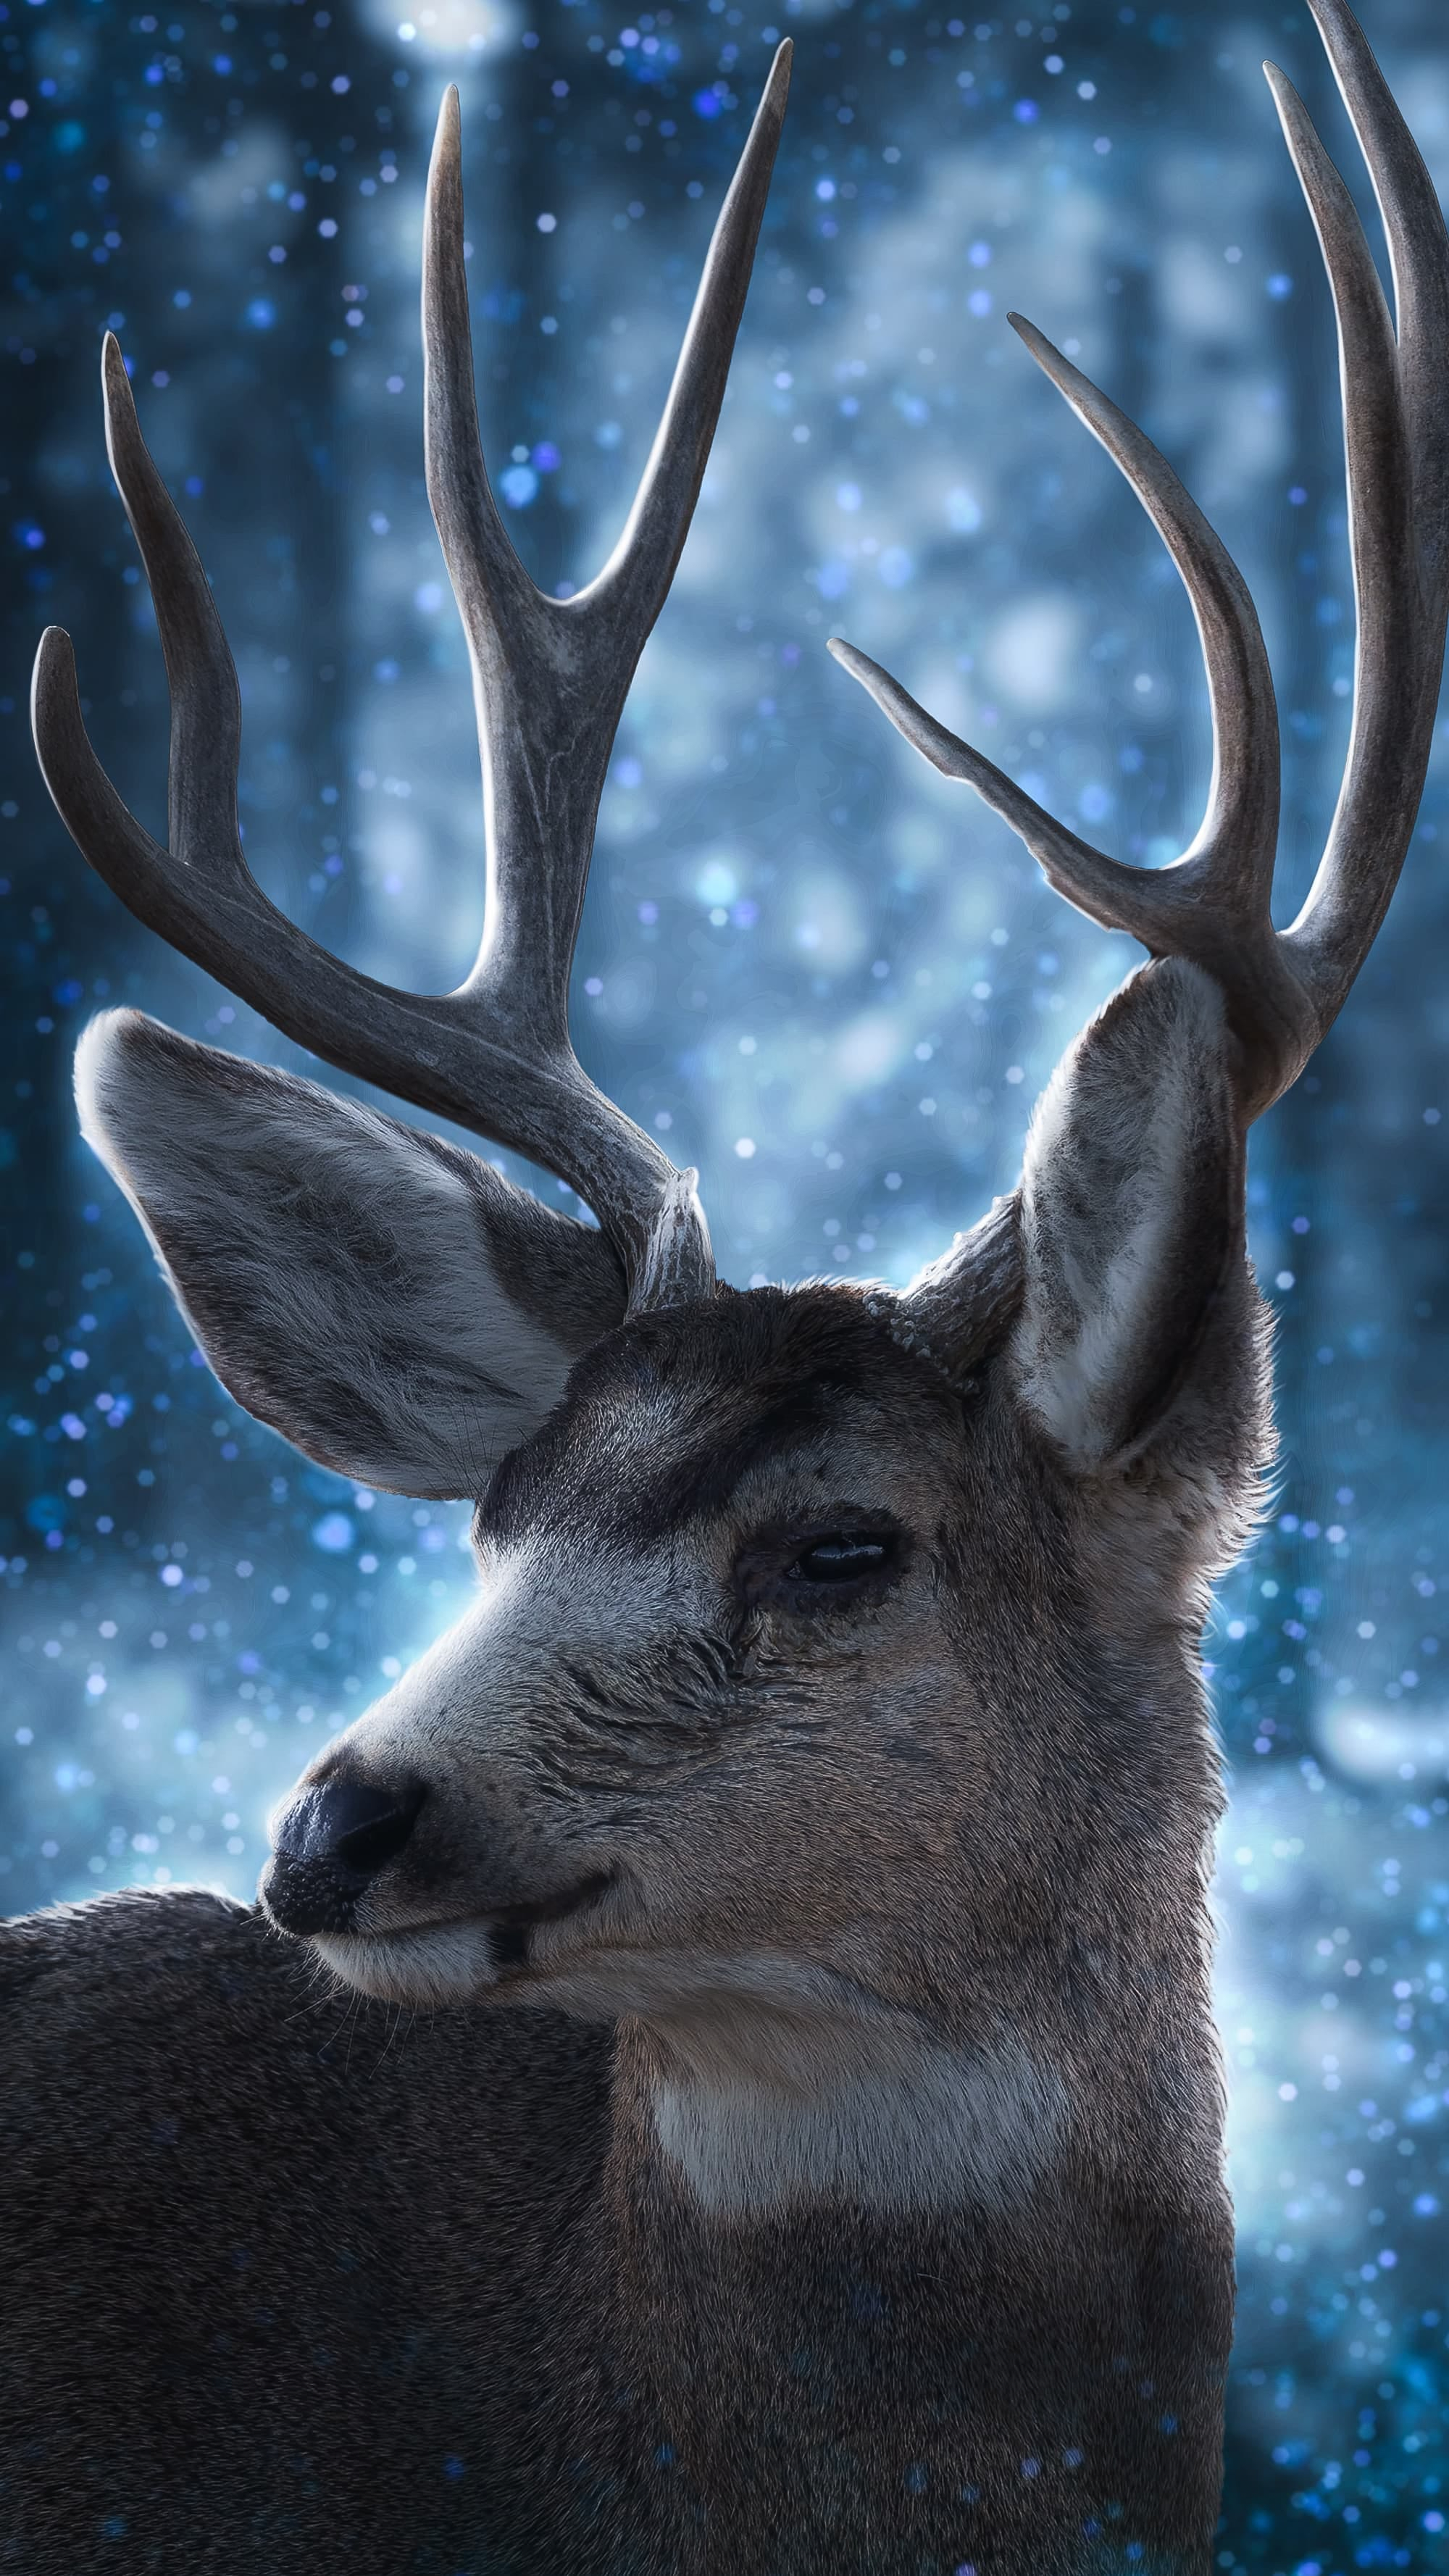 2000x3555 15 free stock photos related to reindeer Pixexid